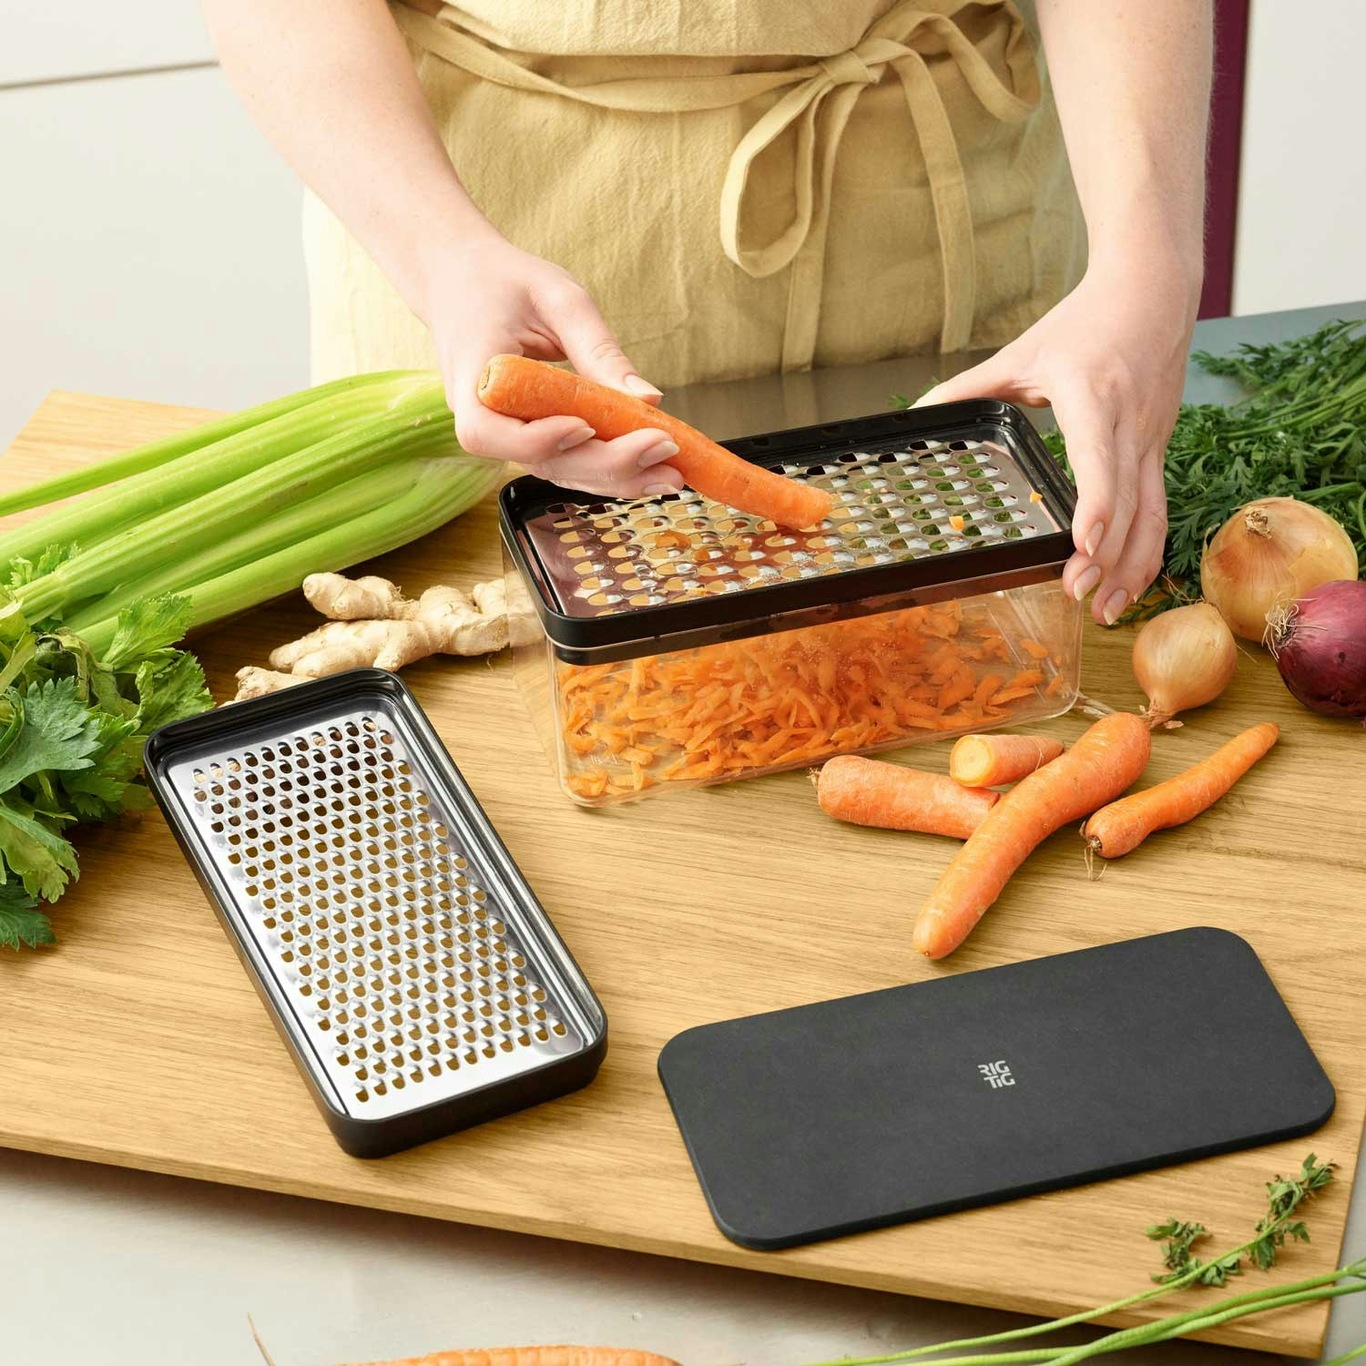 https://royaldesign.com/image/2/rig-tig-grate-it-grater-with-container-2?w=800&quality=80